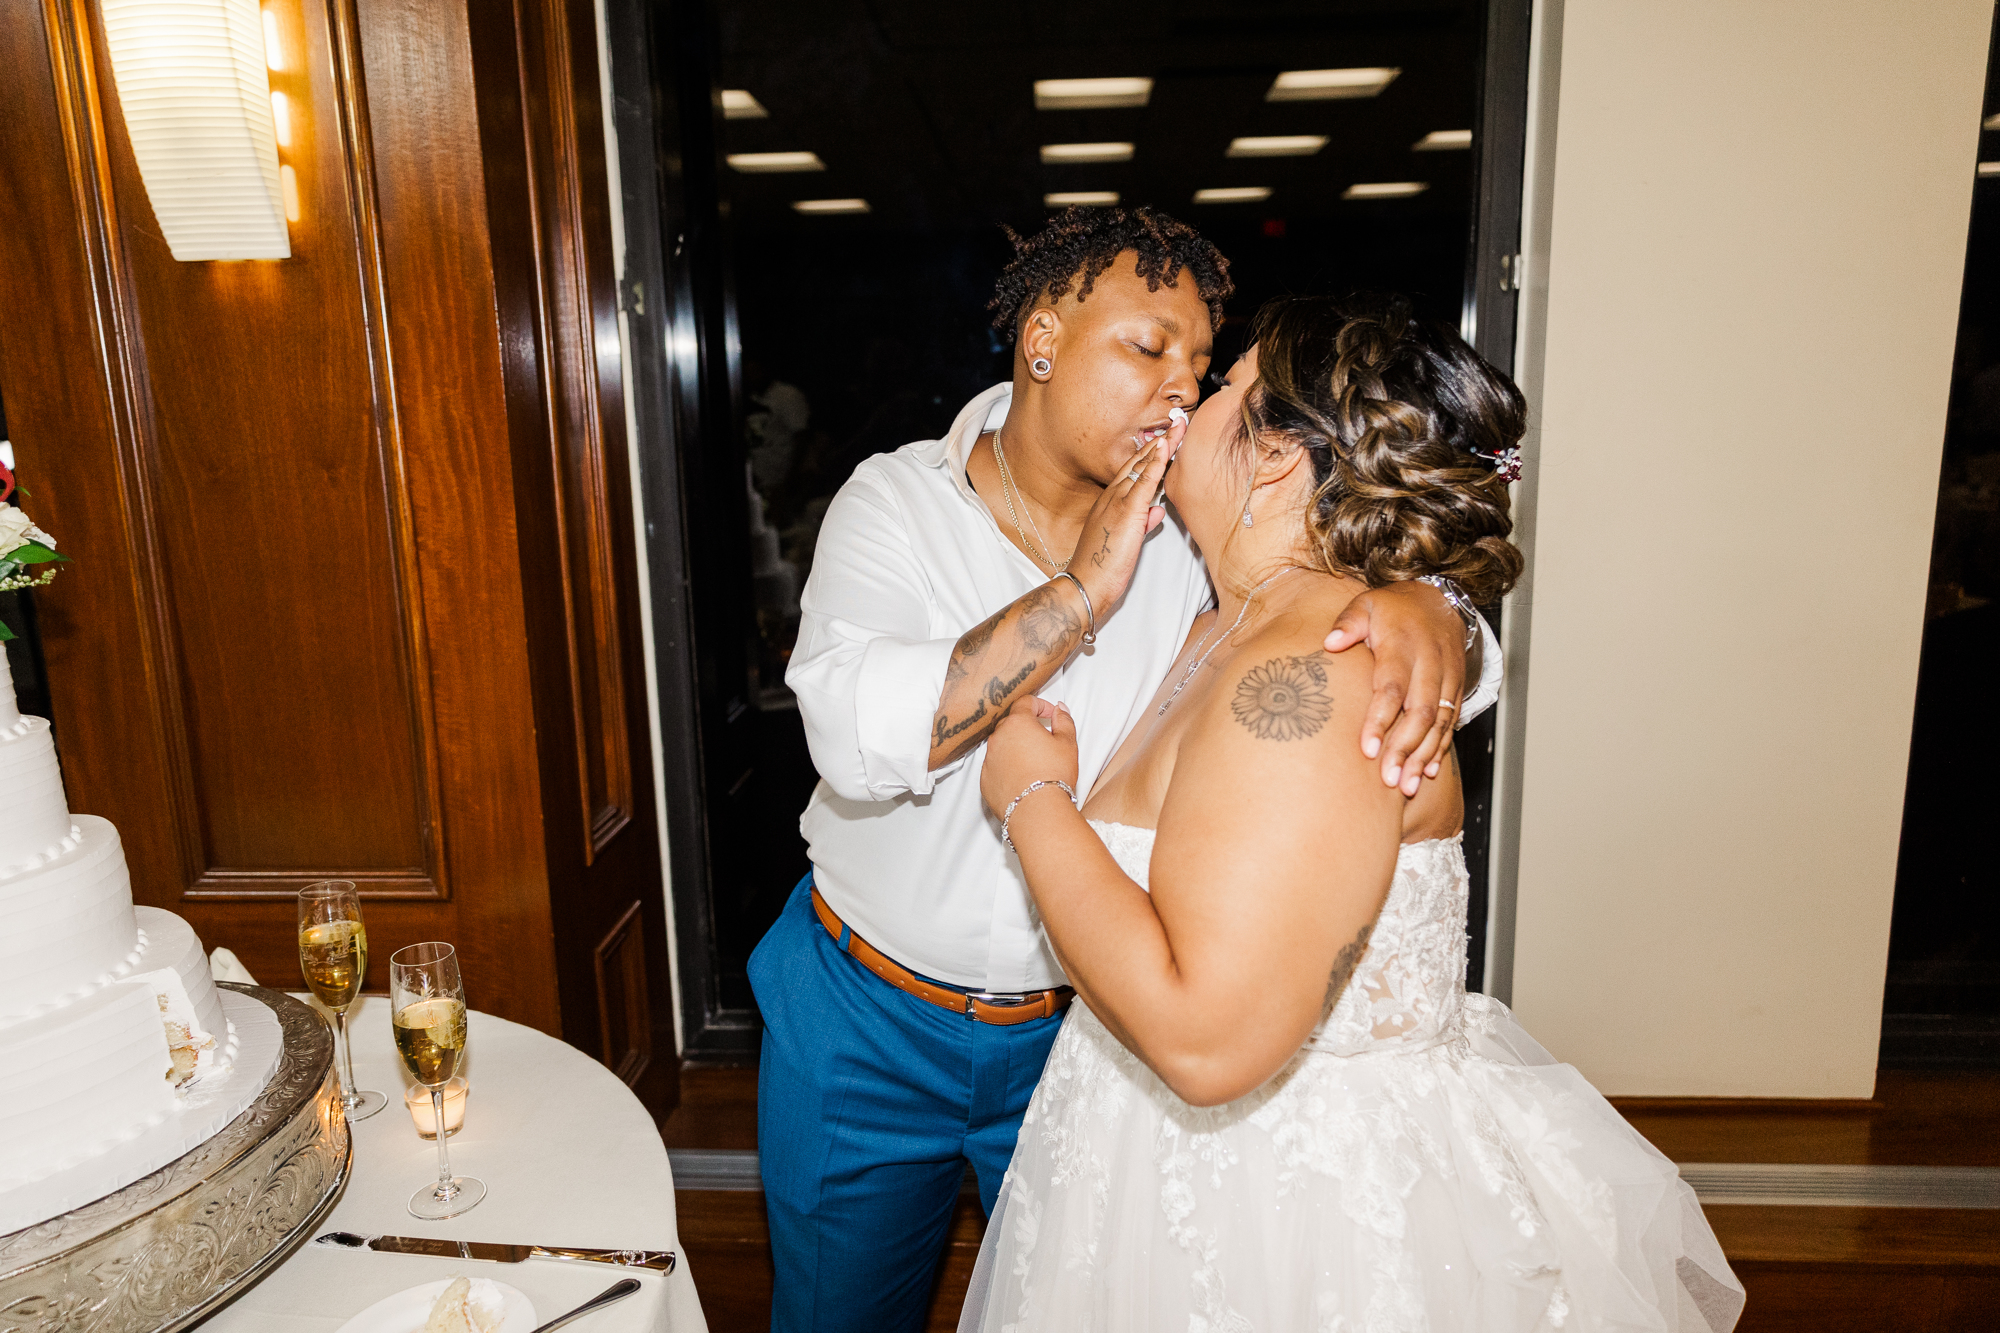 Romantic Thayer Hotel Wedding in the Summertime